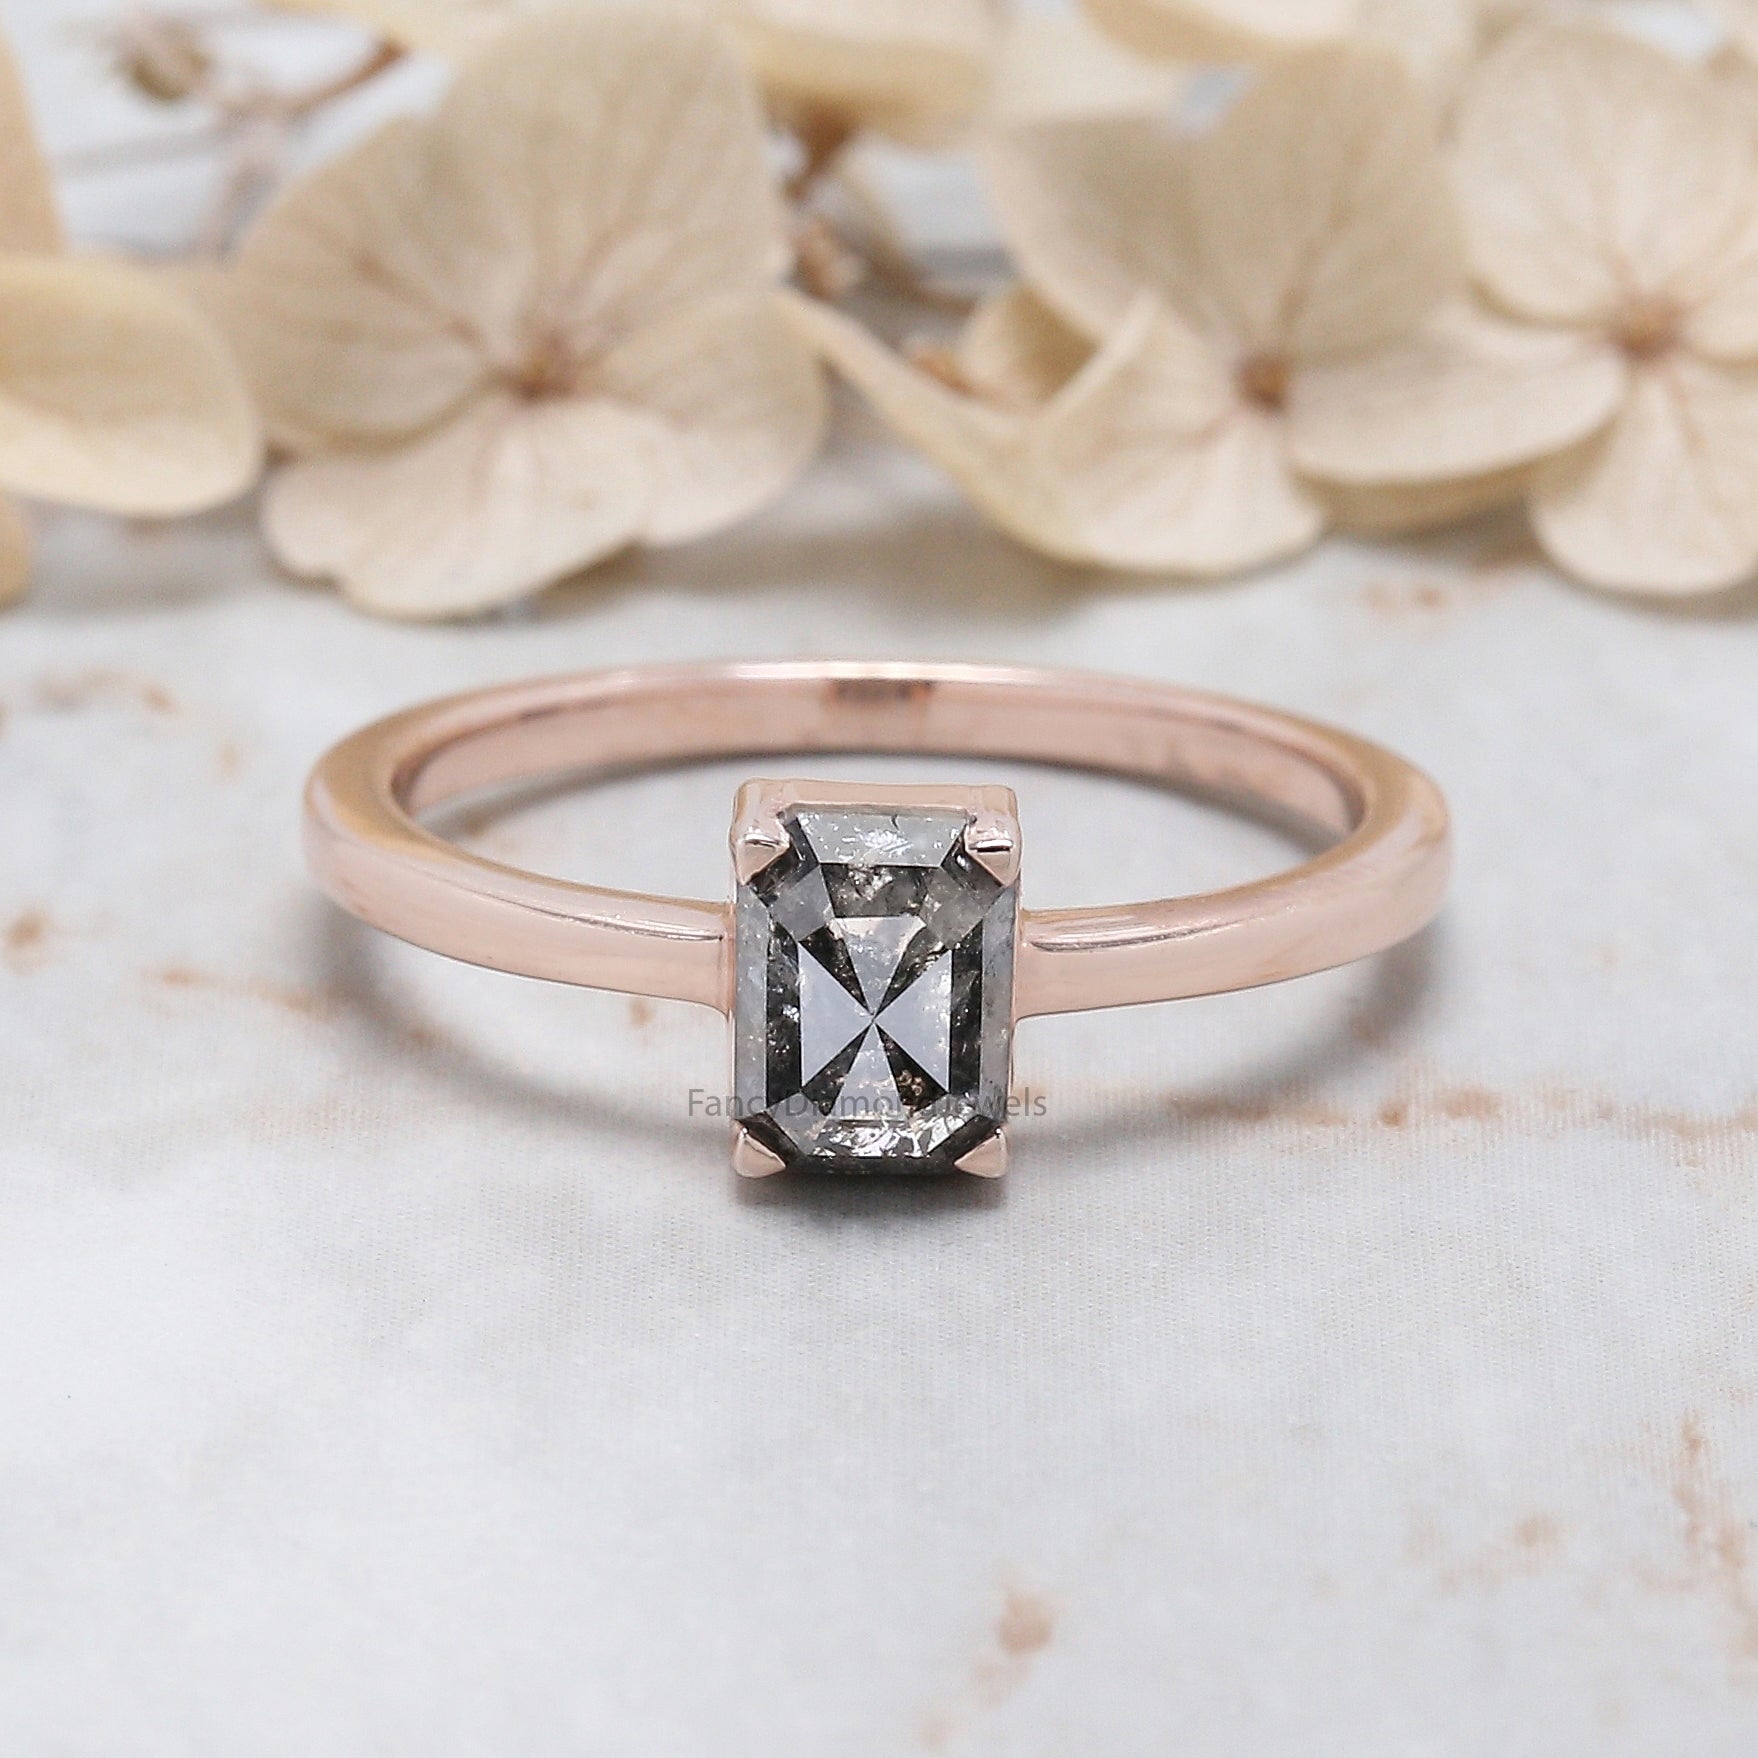 Emerald Cut Salt And Pepper Diamond Ring 1.05 Ct 6.22 MM Emerald Diamond Ring 14K Solid Rose Gold Silver Engagement Ring Gift For Her QLB2044